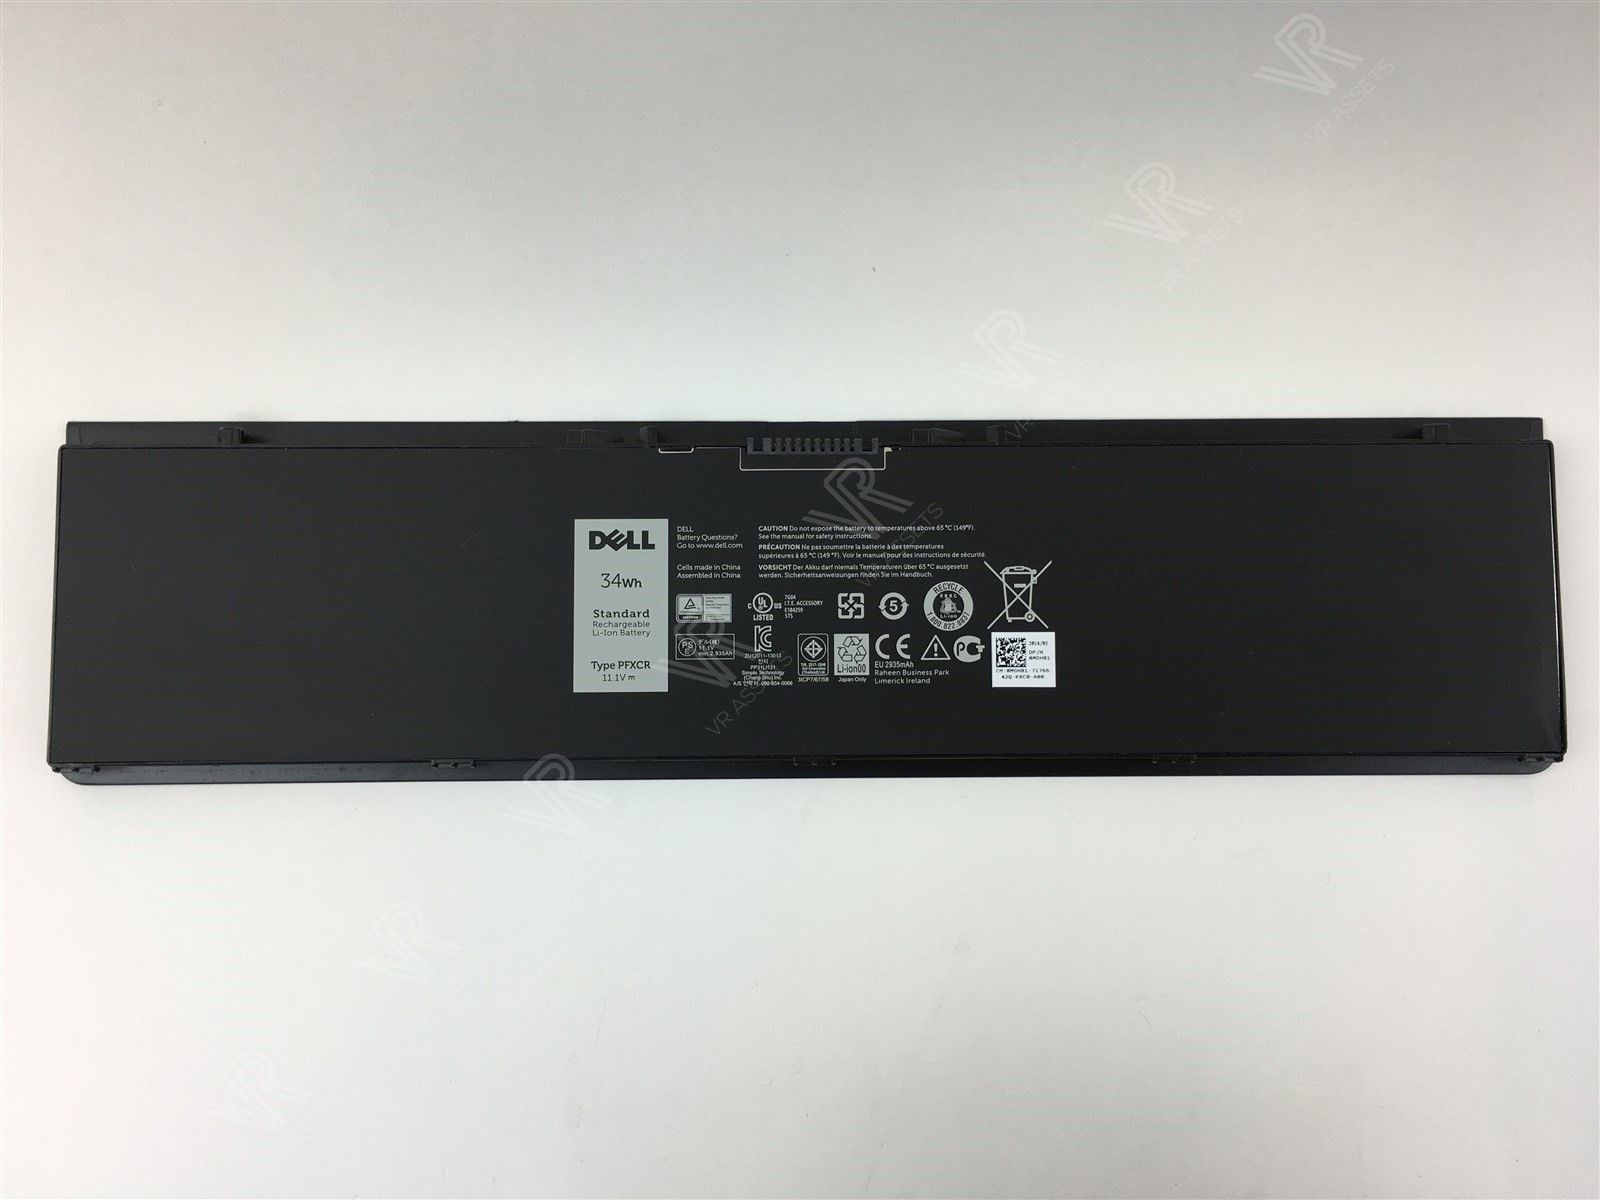 Dell Latitude E7440 34Wh 11.1V 3 Cell Laptop Battery MGH81 0MGH81 PFXCR